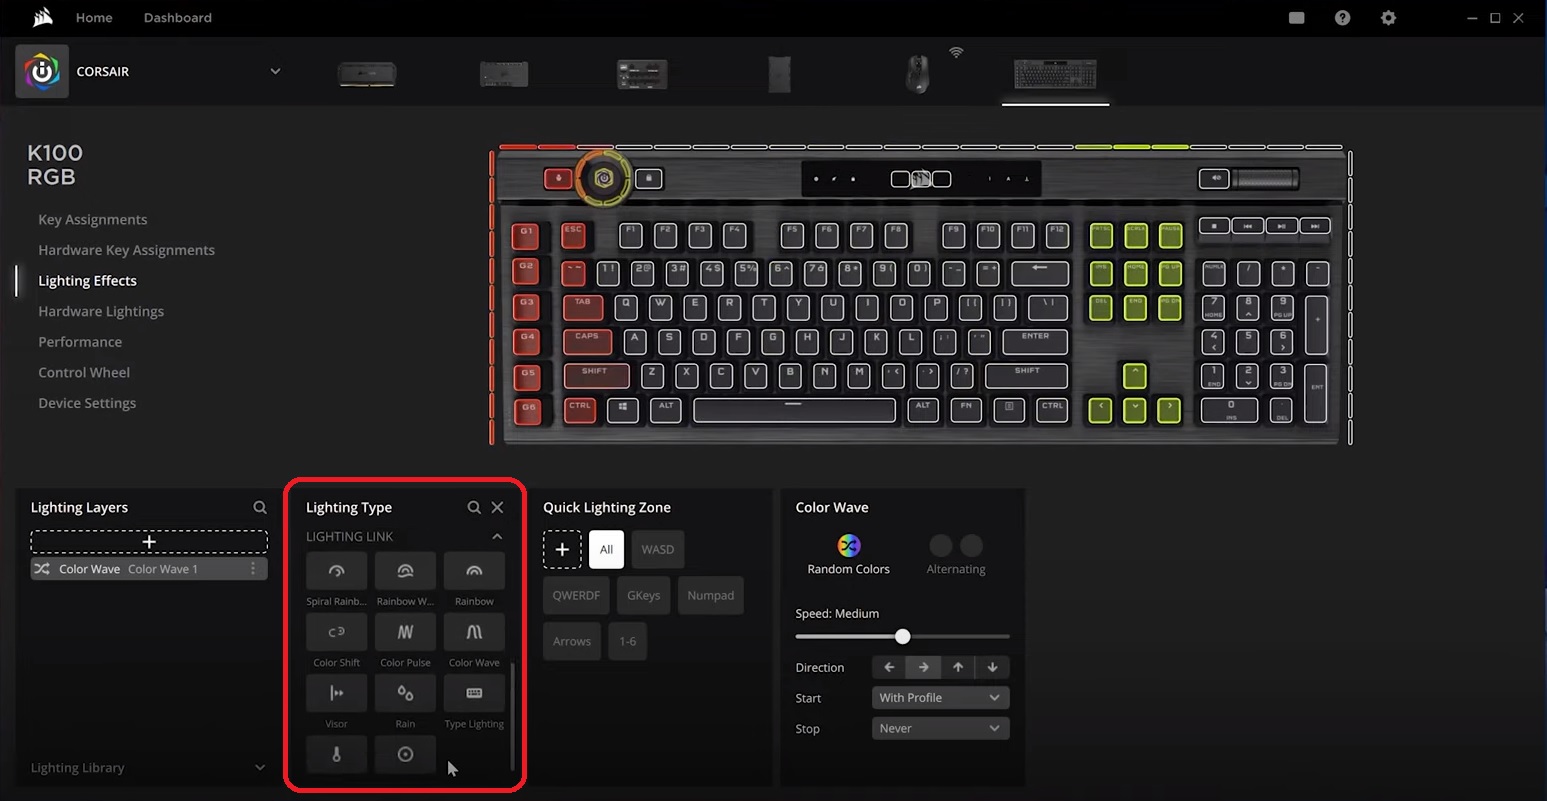 How To Save Edits To Your Corsair Gaming Keyboard Profile